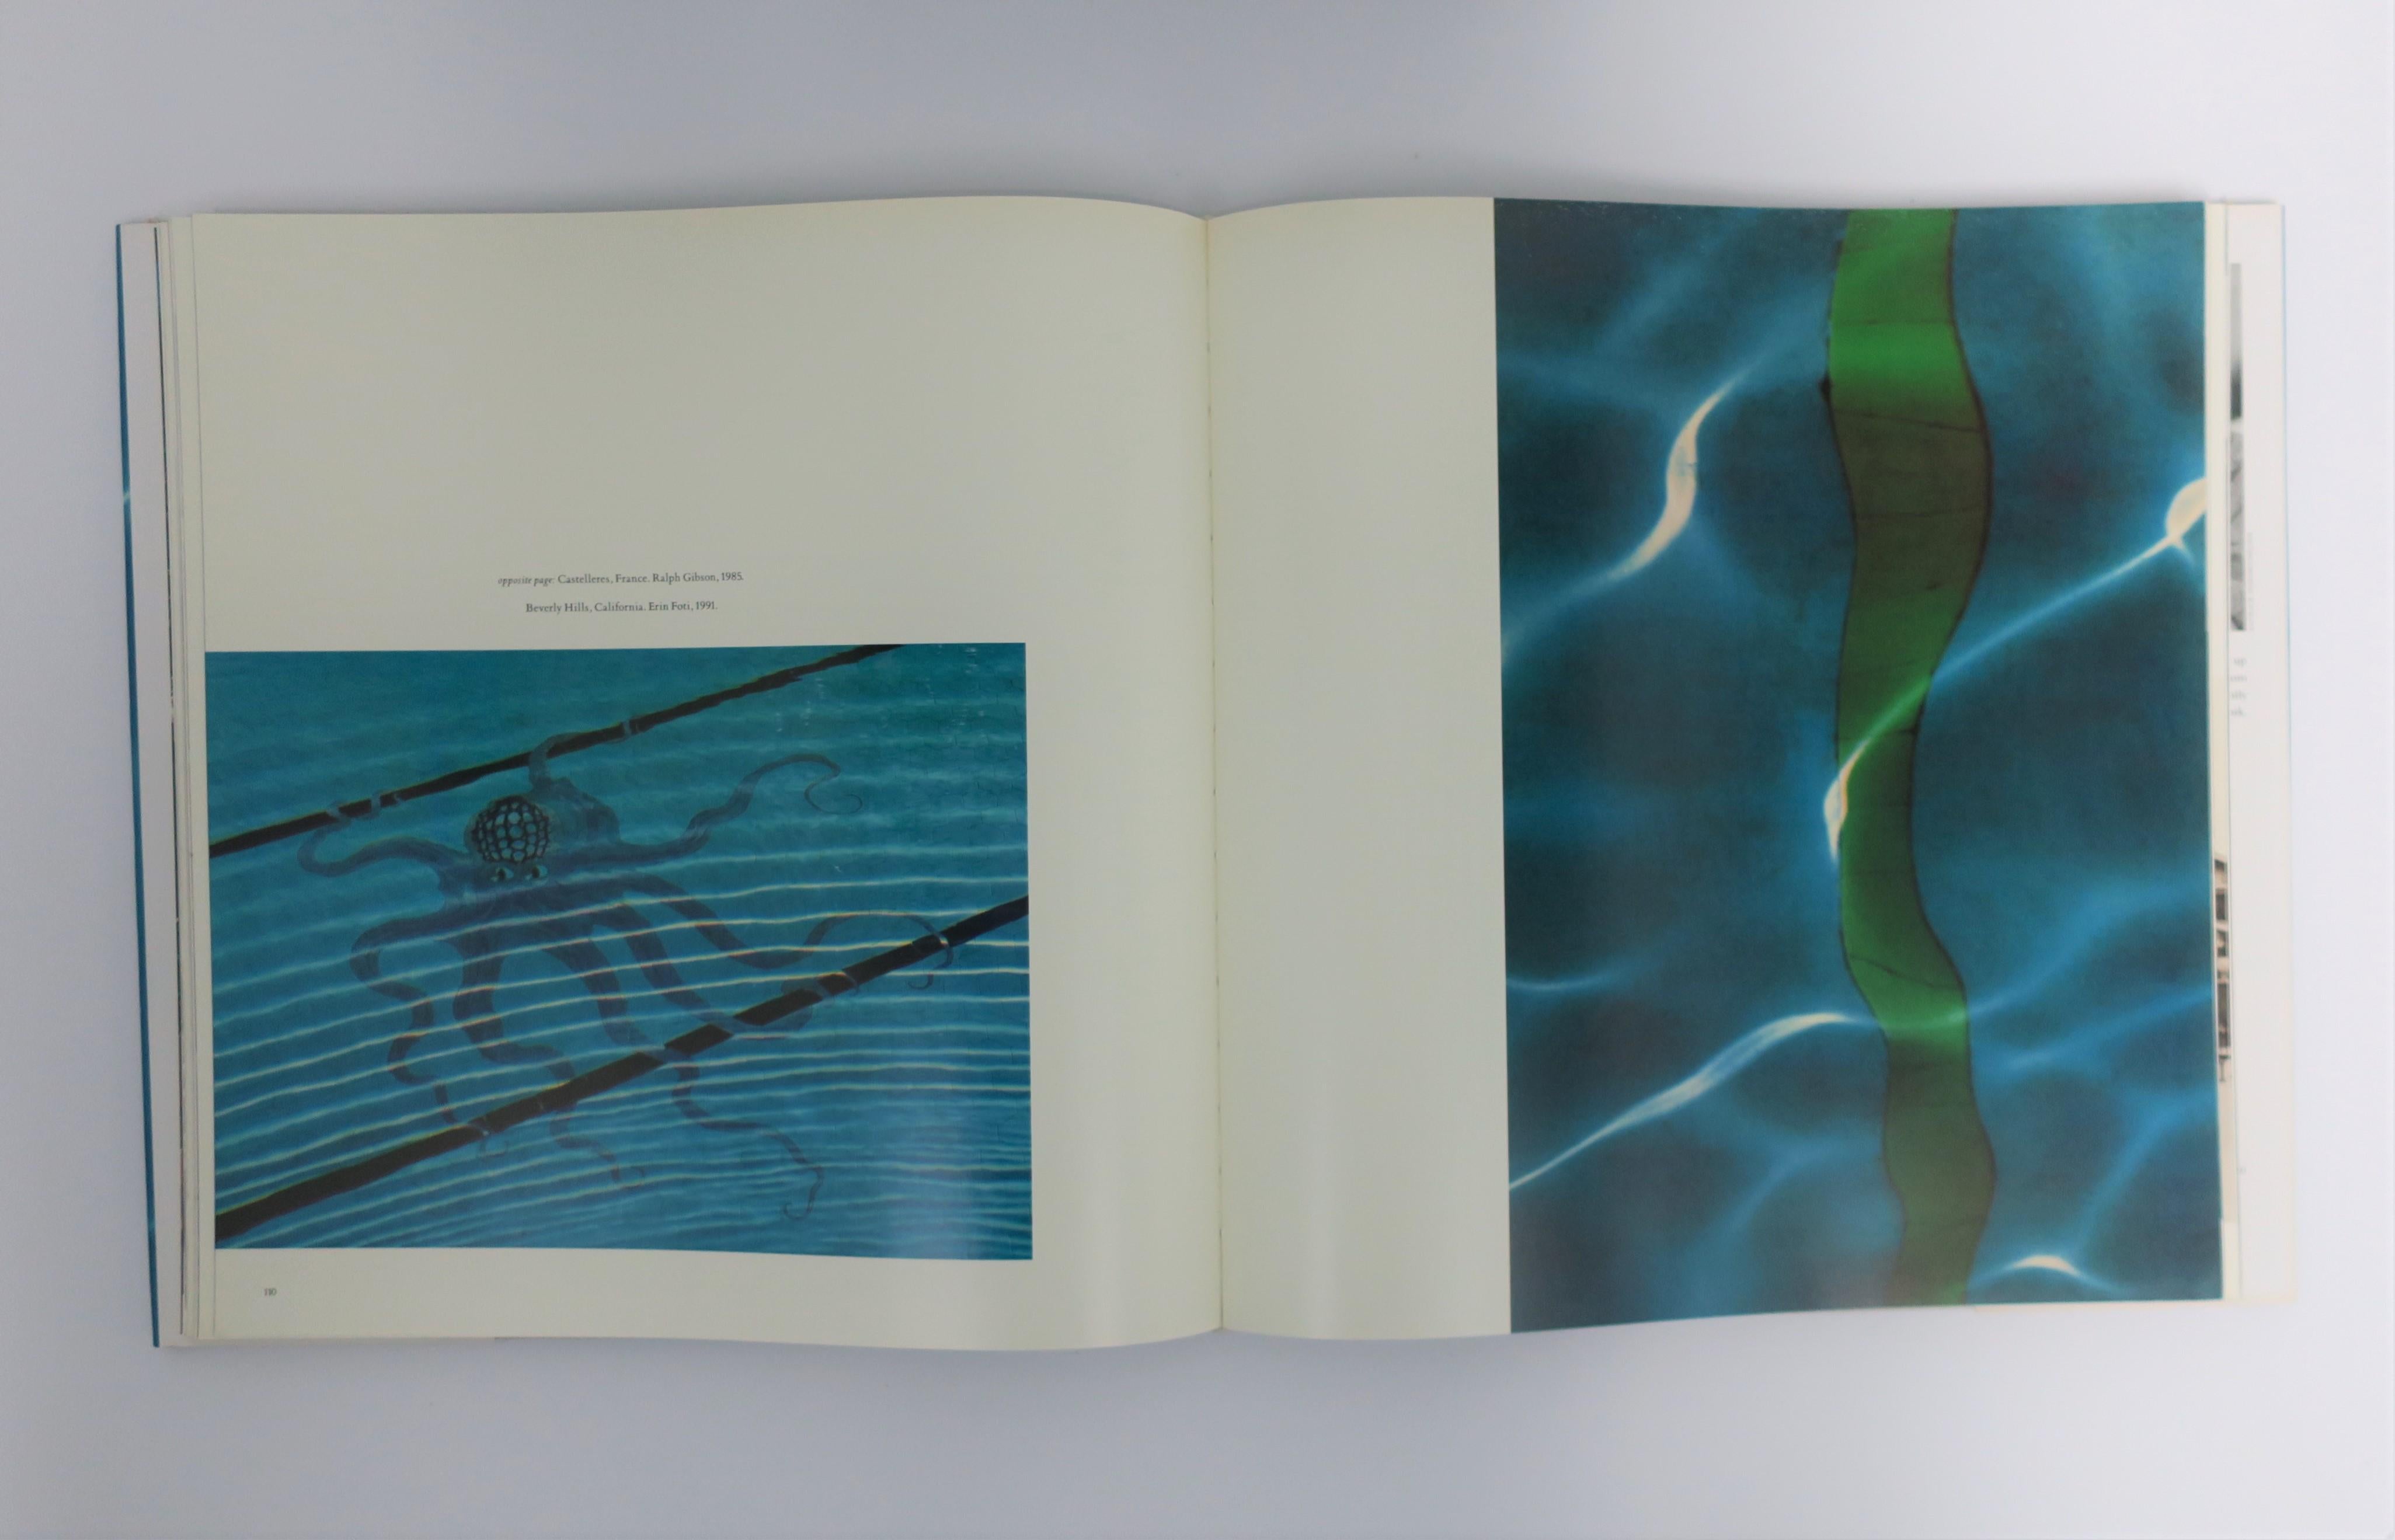 Pools by Kelly Klein an Architecture Coffee Table or Library Book, 1992 For Sale 4